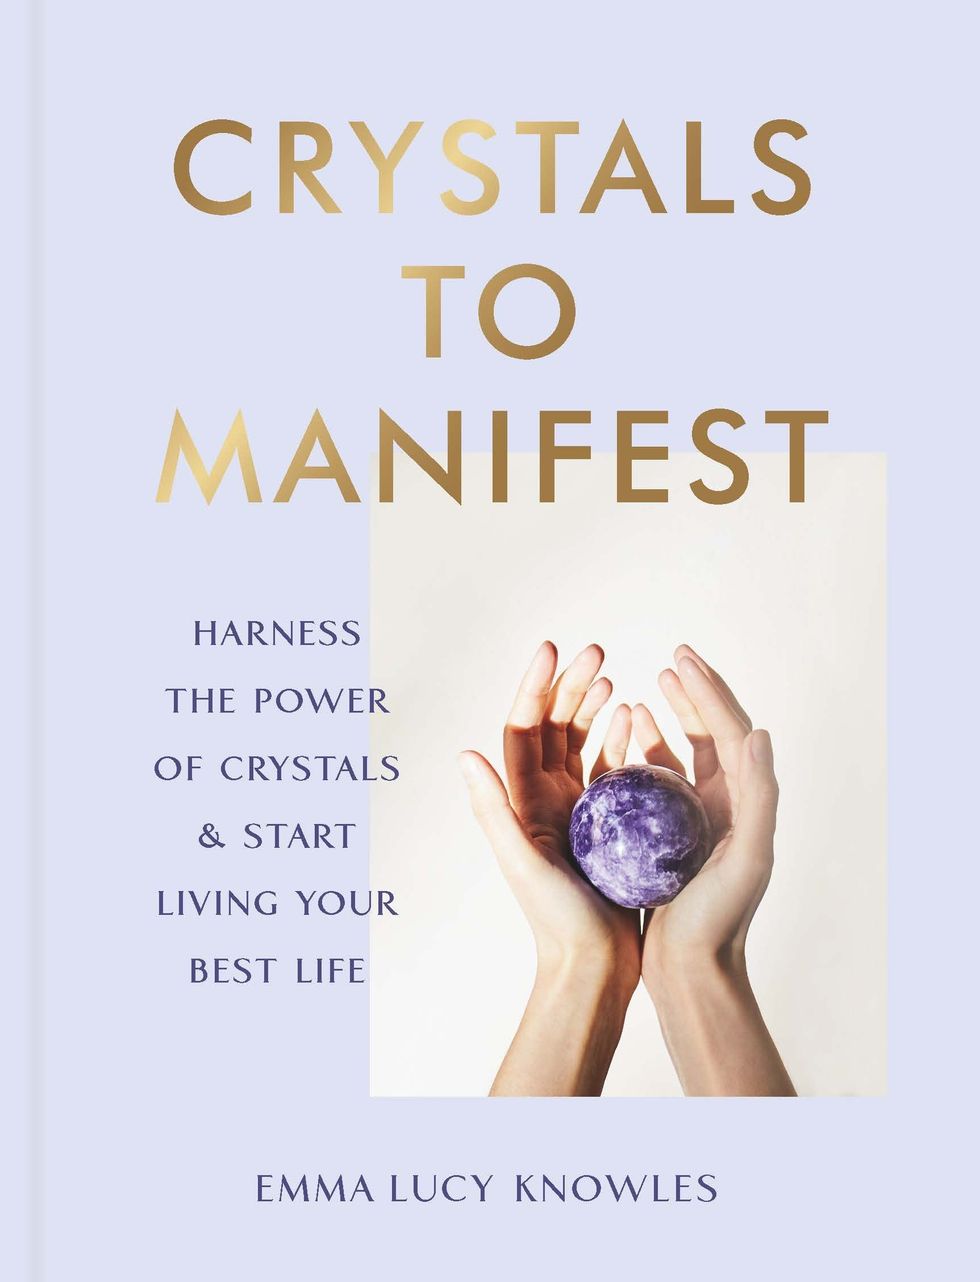 Crystals to Manifest by Emma Lucy Knowles